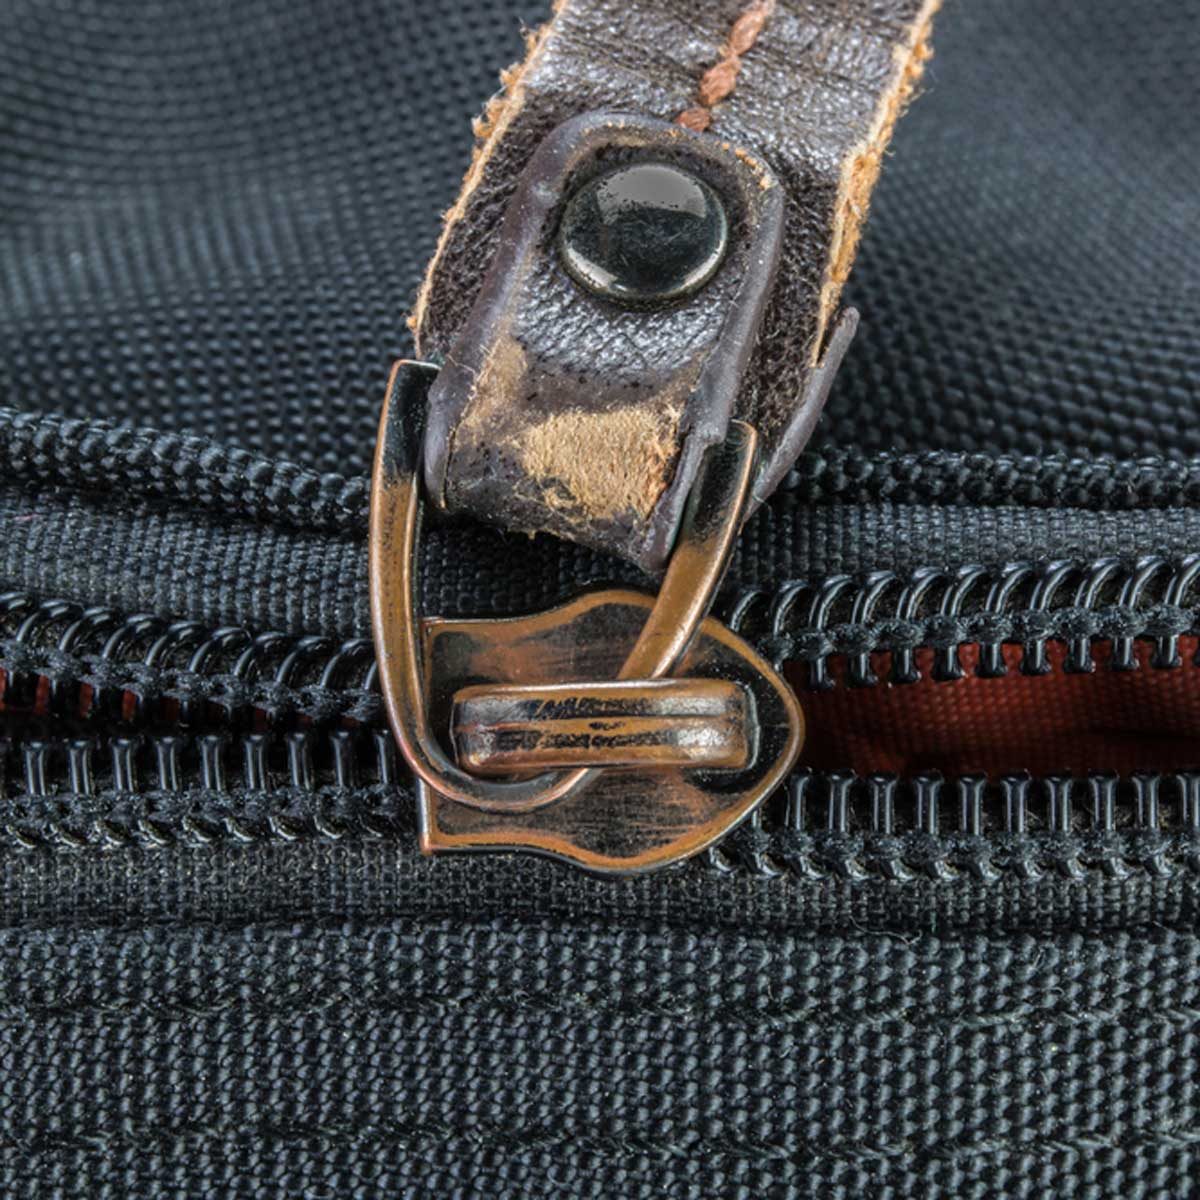 How to Fix a ZIPPER - Problems Solved